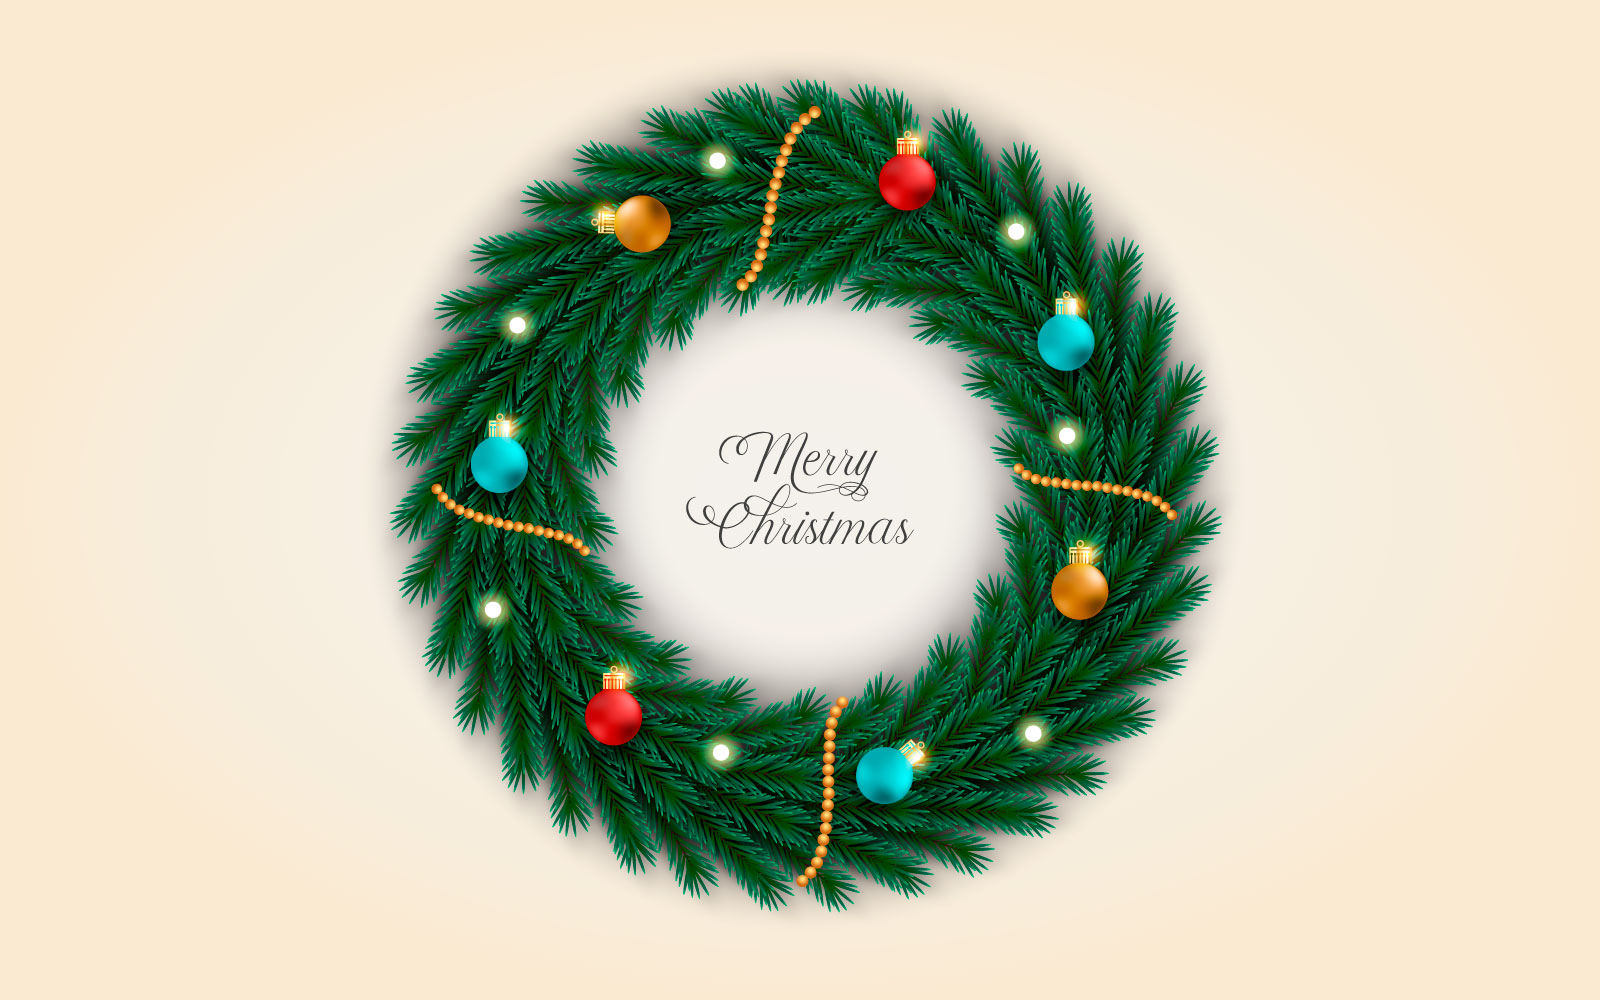 Best christmas wishes wreath with decorated holiday wreath flat vector